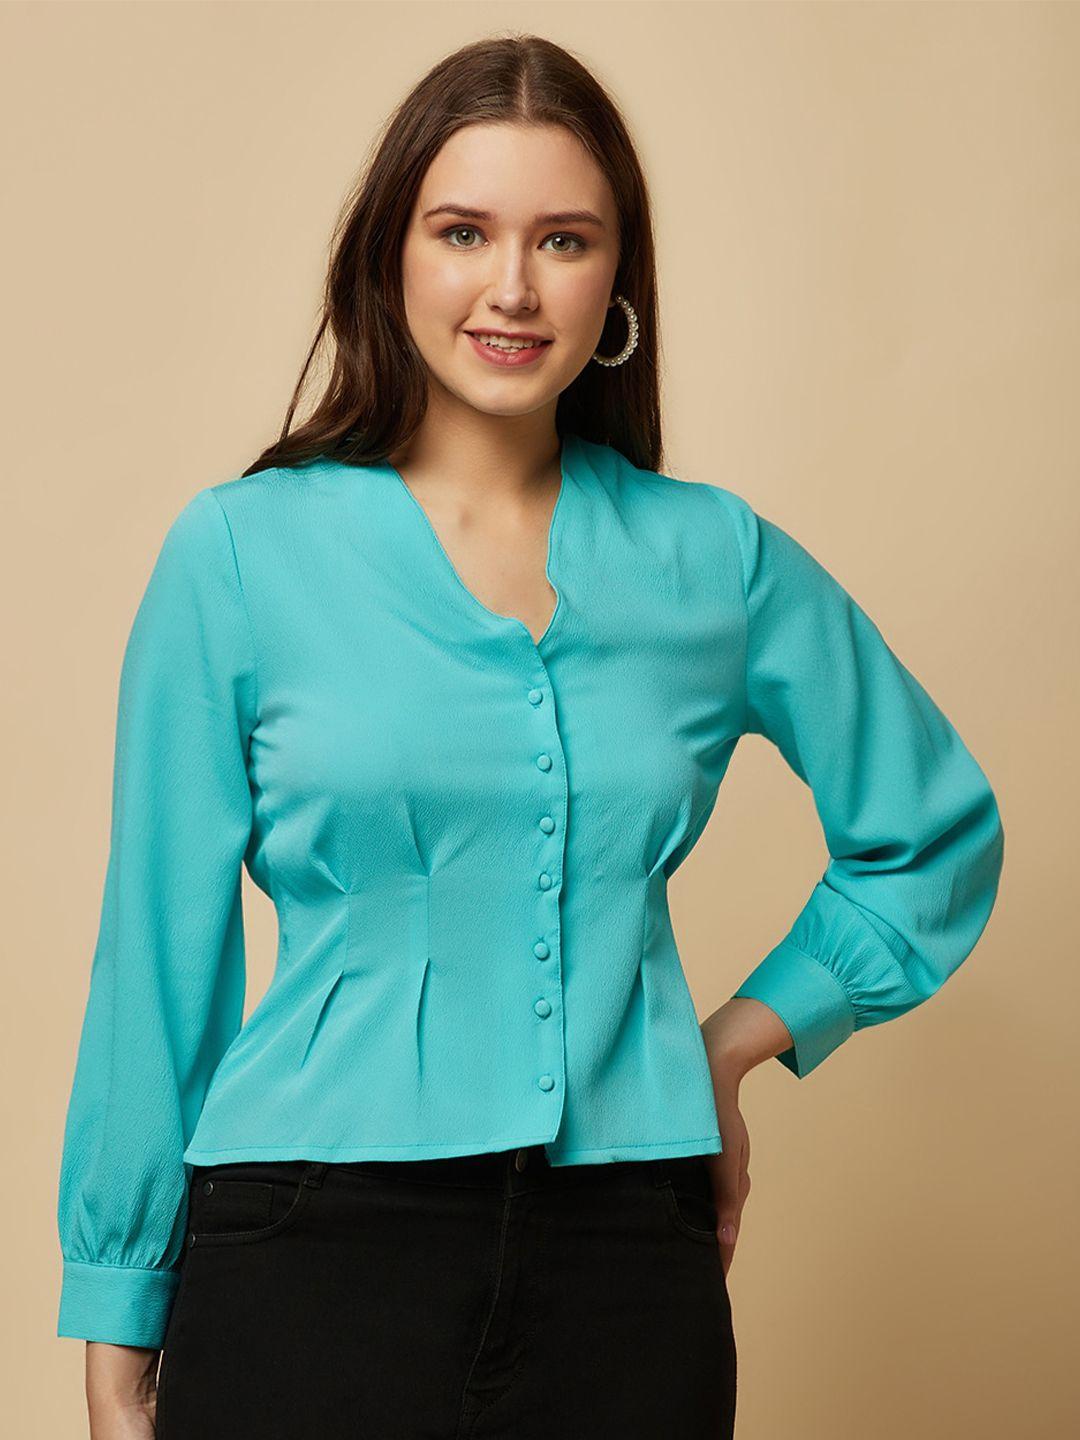 raassio pleated shirt style crepe top